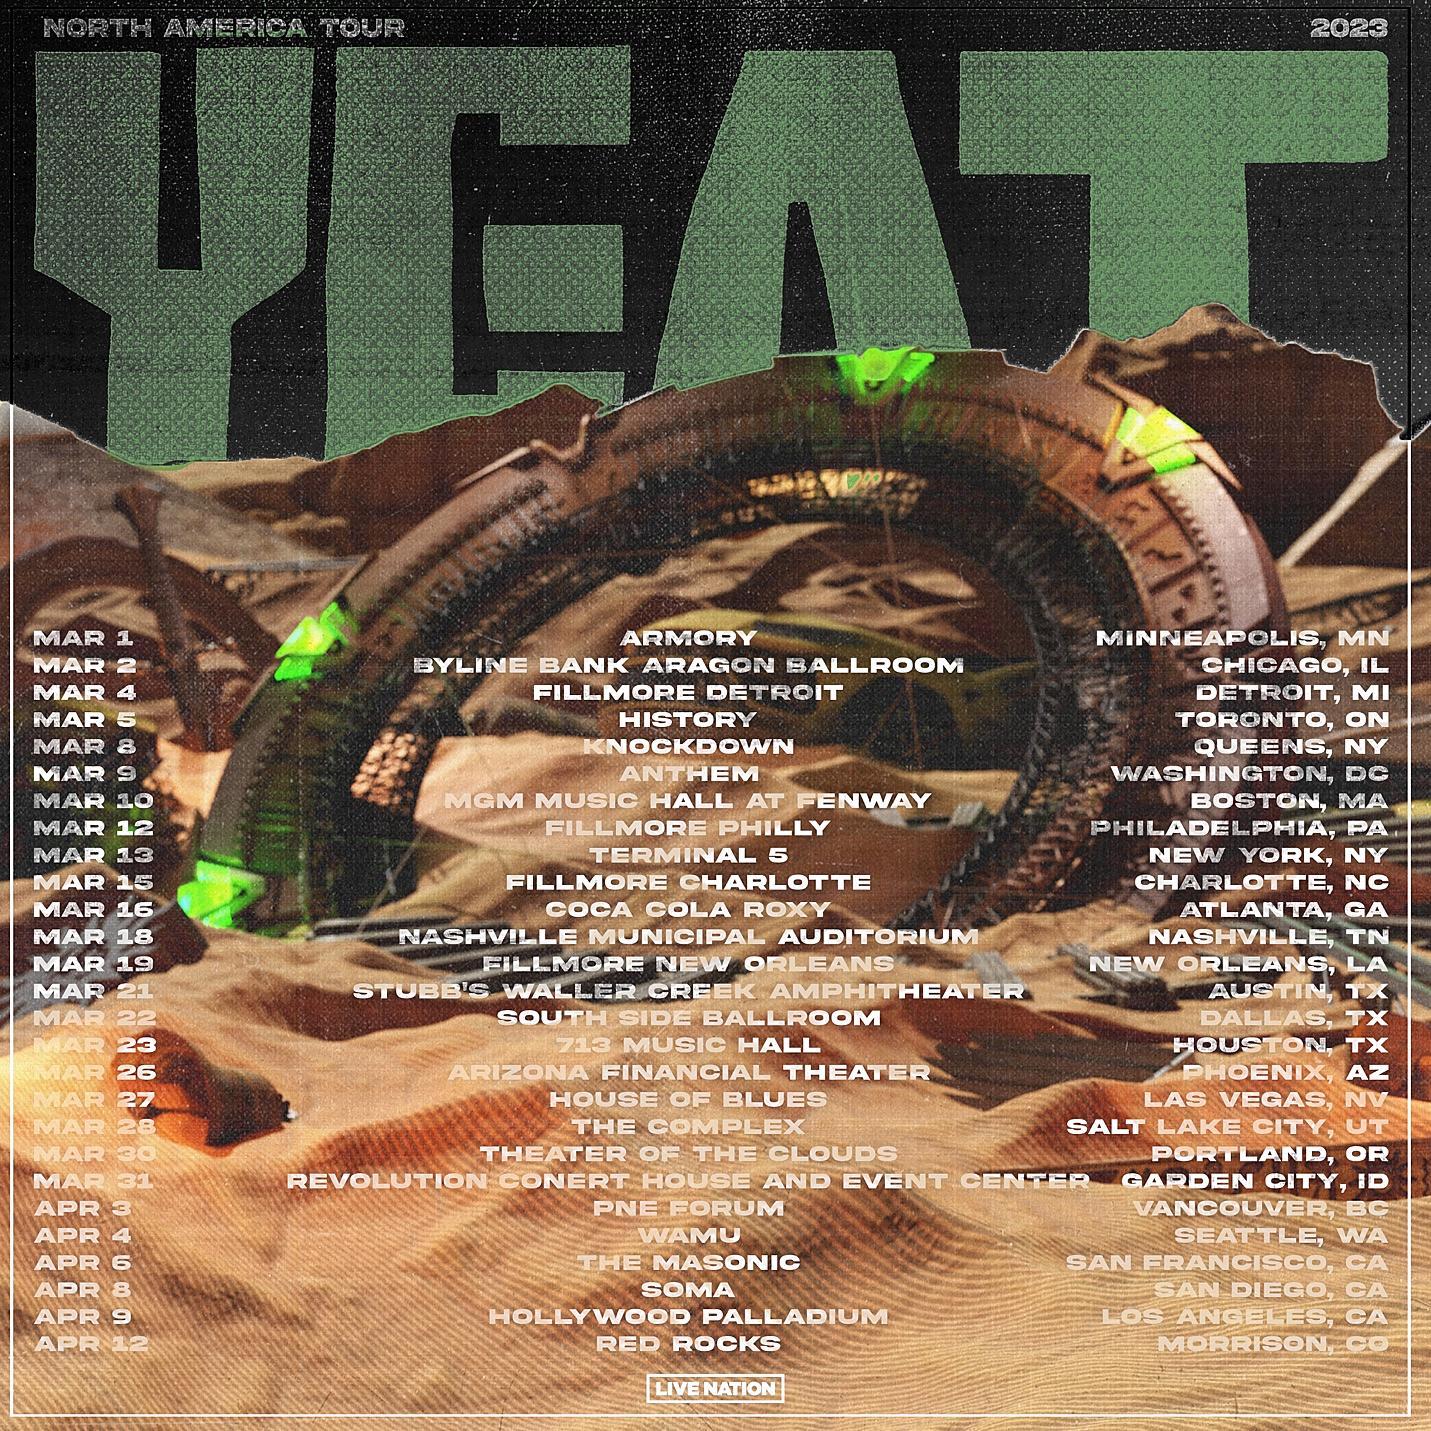 Yeat Concert Live Stream, Date, Location and Tickets info